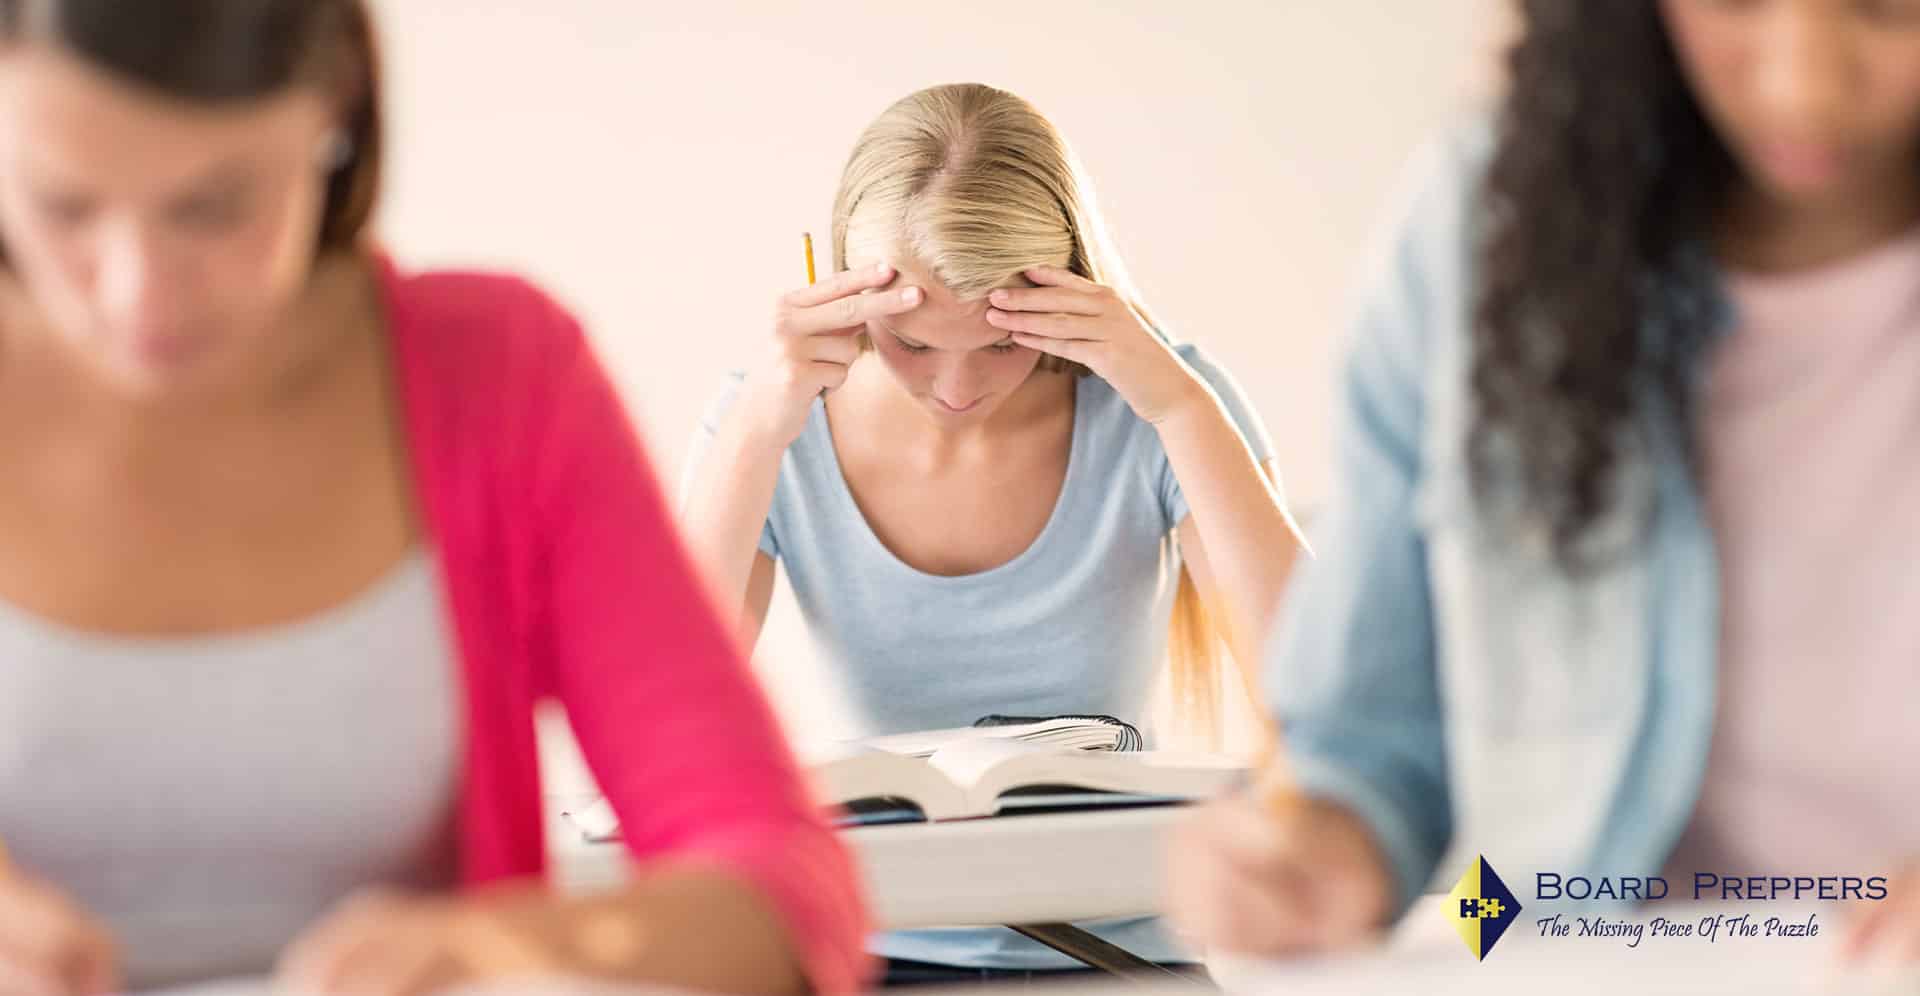 how to reduce test anxiety